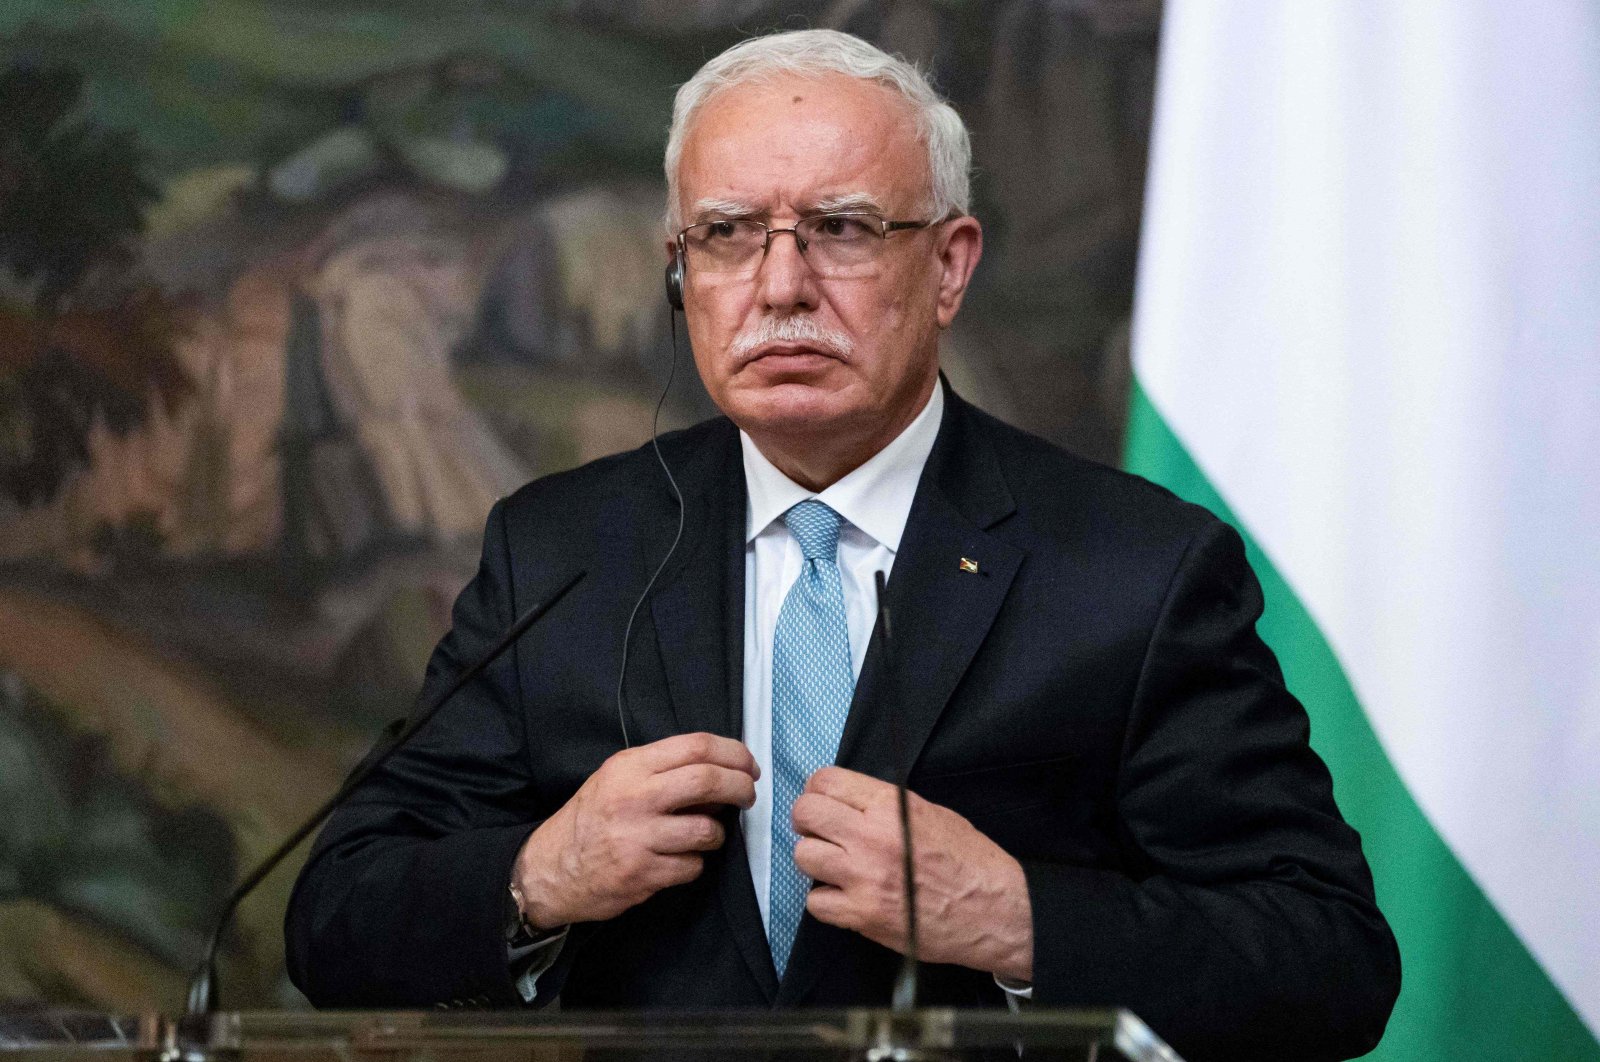 Palestinian Foreign Minister Riyad al-Maliki arrives for a press conference with the Russian Foreign Minister Sergey Lavrov (not pictured) following a meeting in Moscow, Russia, May 5, 2021. (AFP Photo)